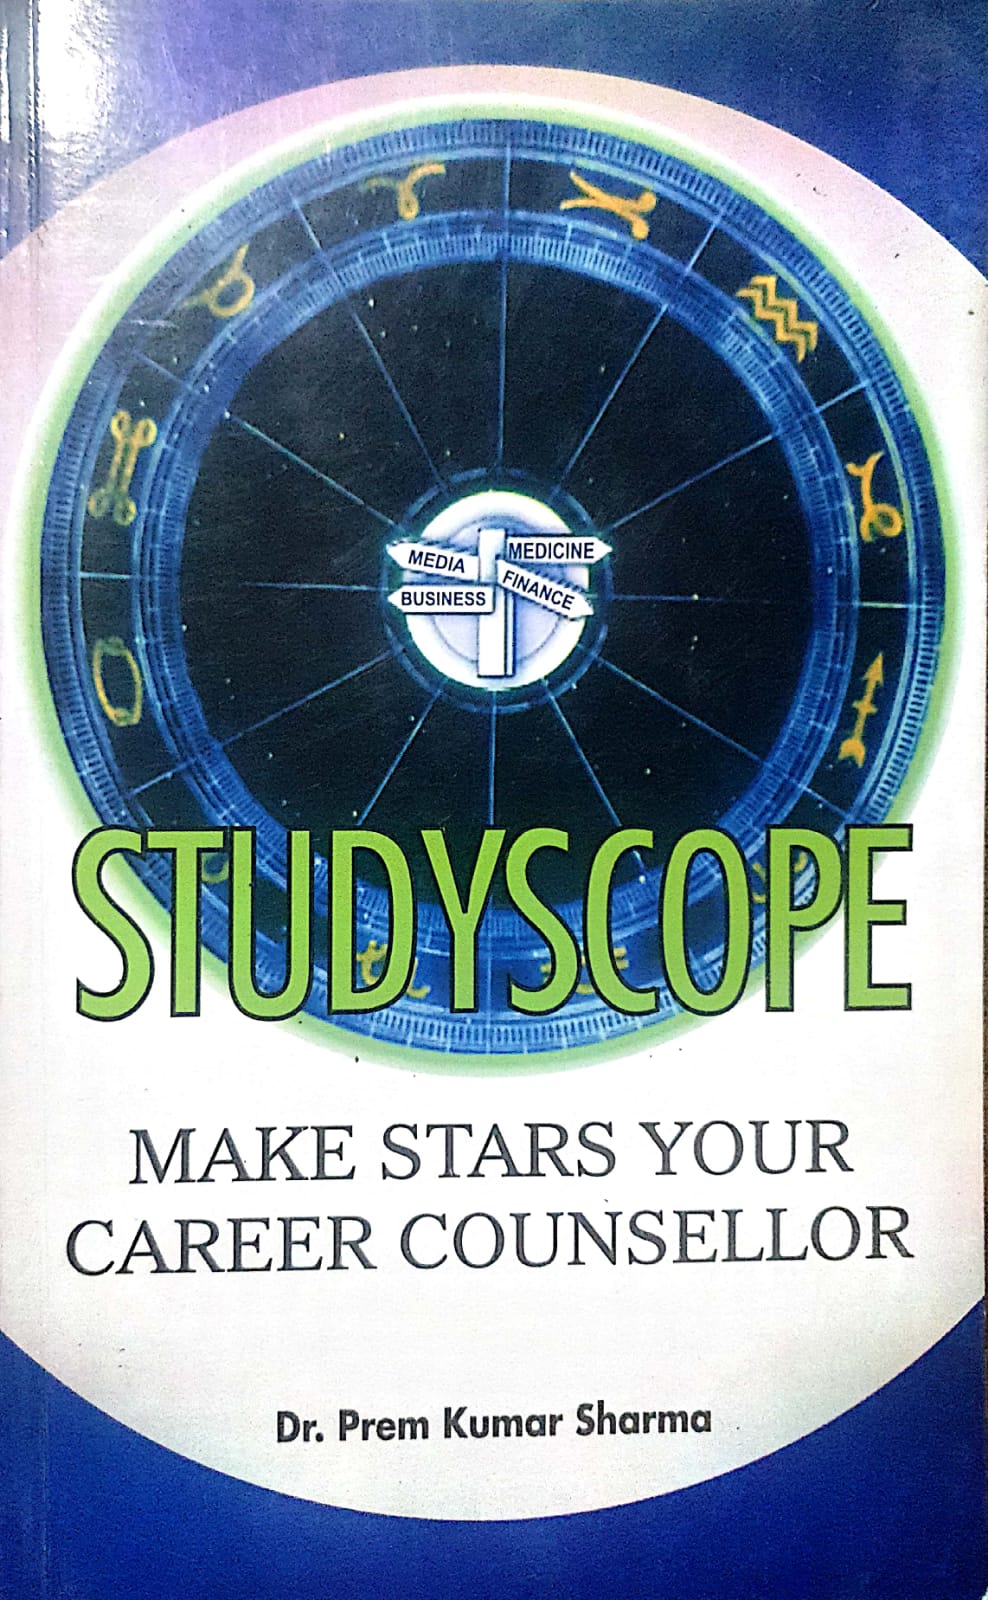 Studycope- Make Starts Your Career Counsellor